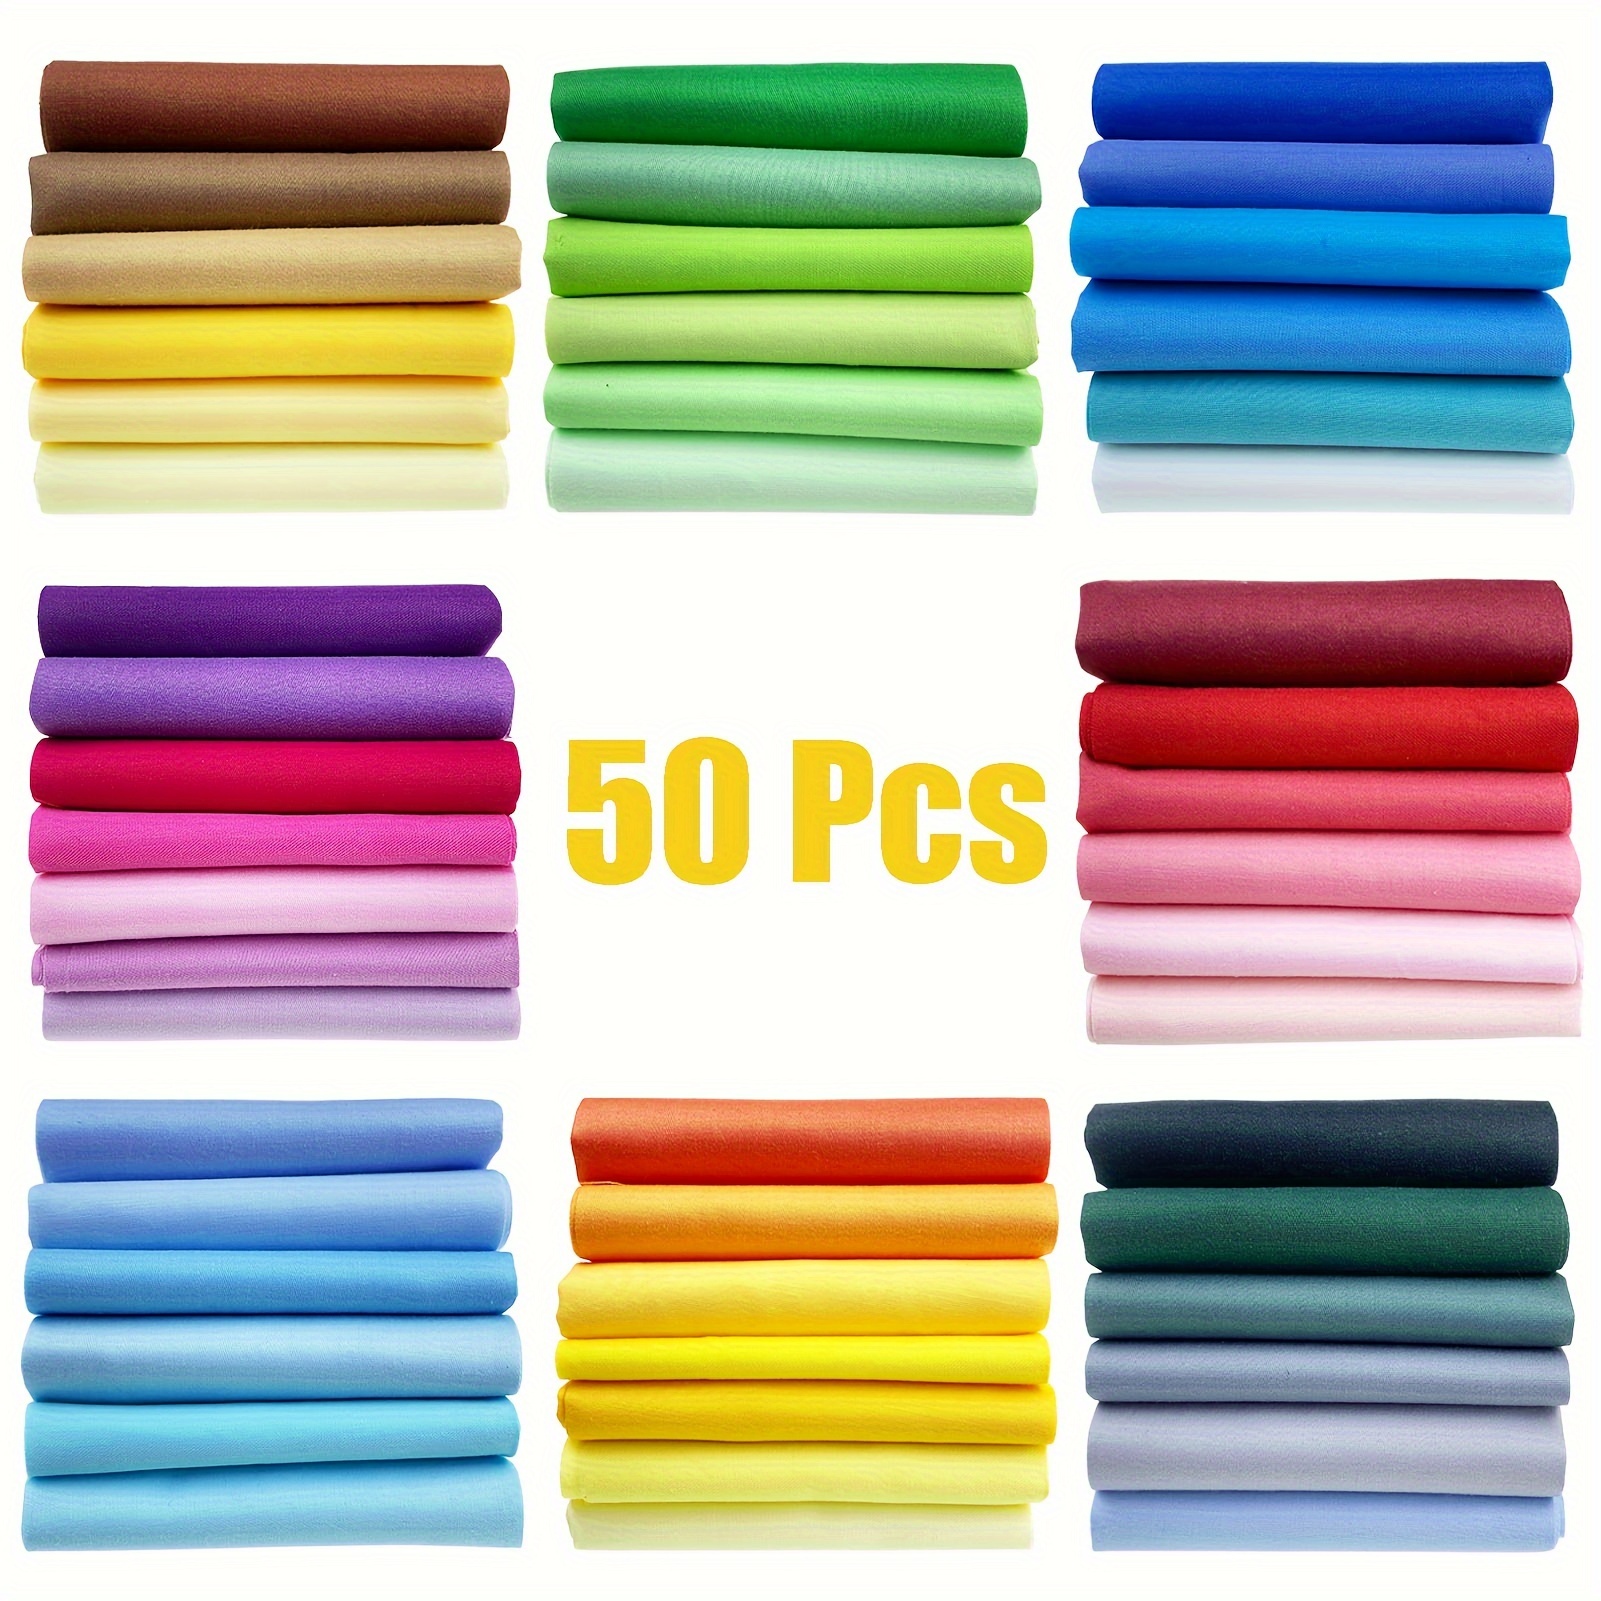 

50pcs 25×25cm Cotton Fabric, Sewing Fabric Twill Weave 170g 100% Cotton Plain Fabric For Diy, Crafts, Projects, Quilting